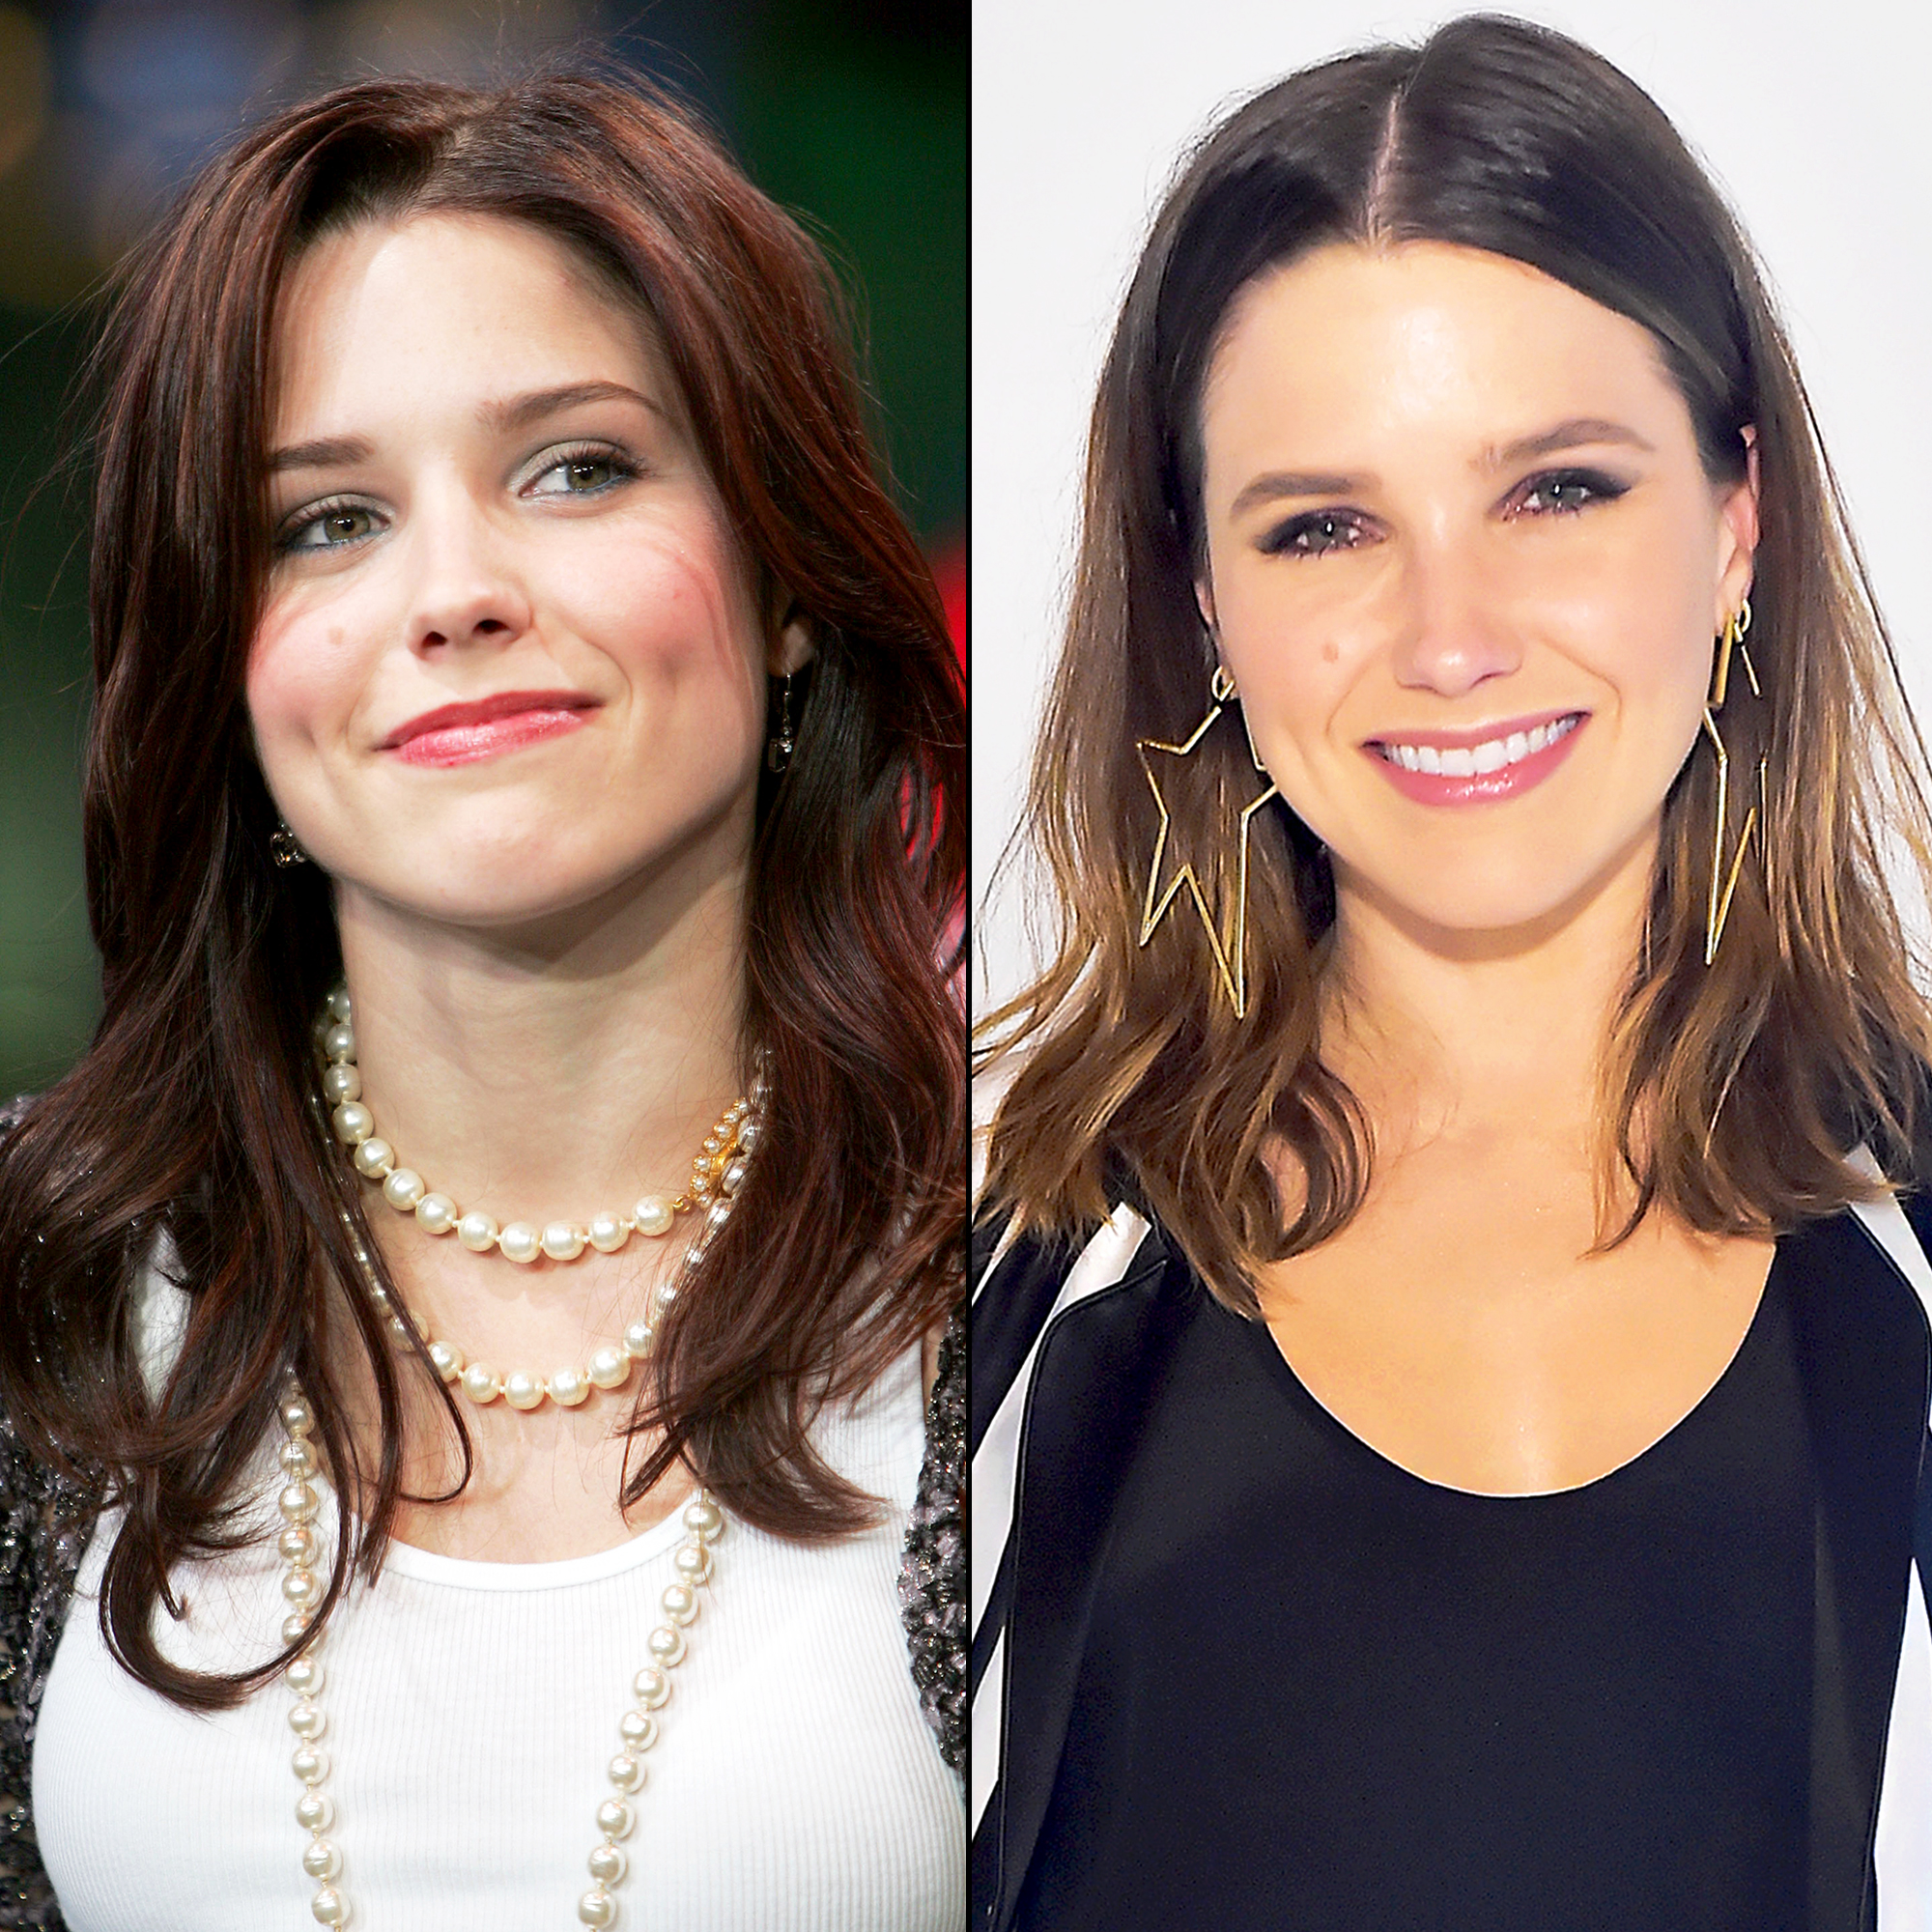 The Cast of One Tree Hill: Where Are They Now?